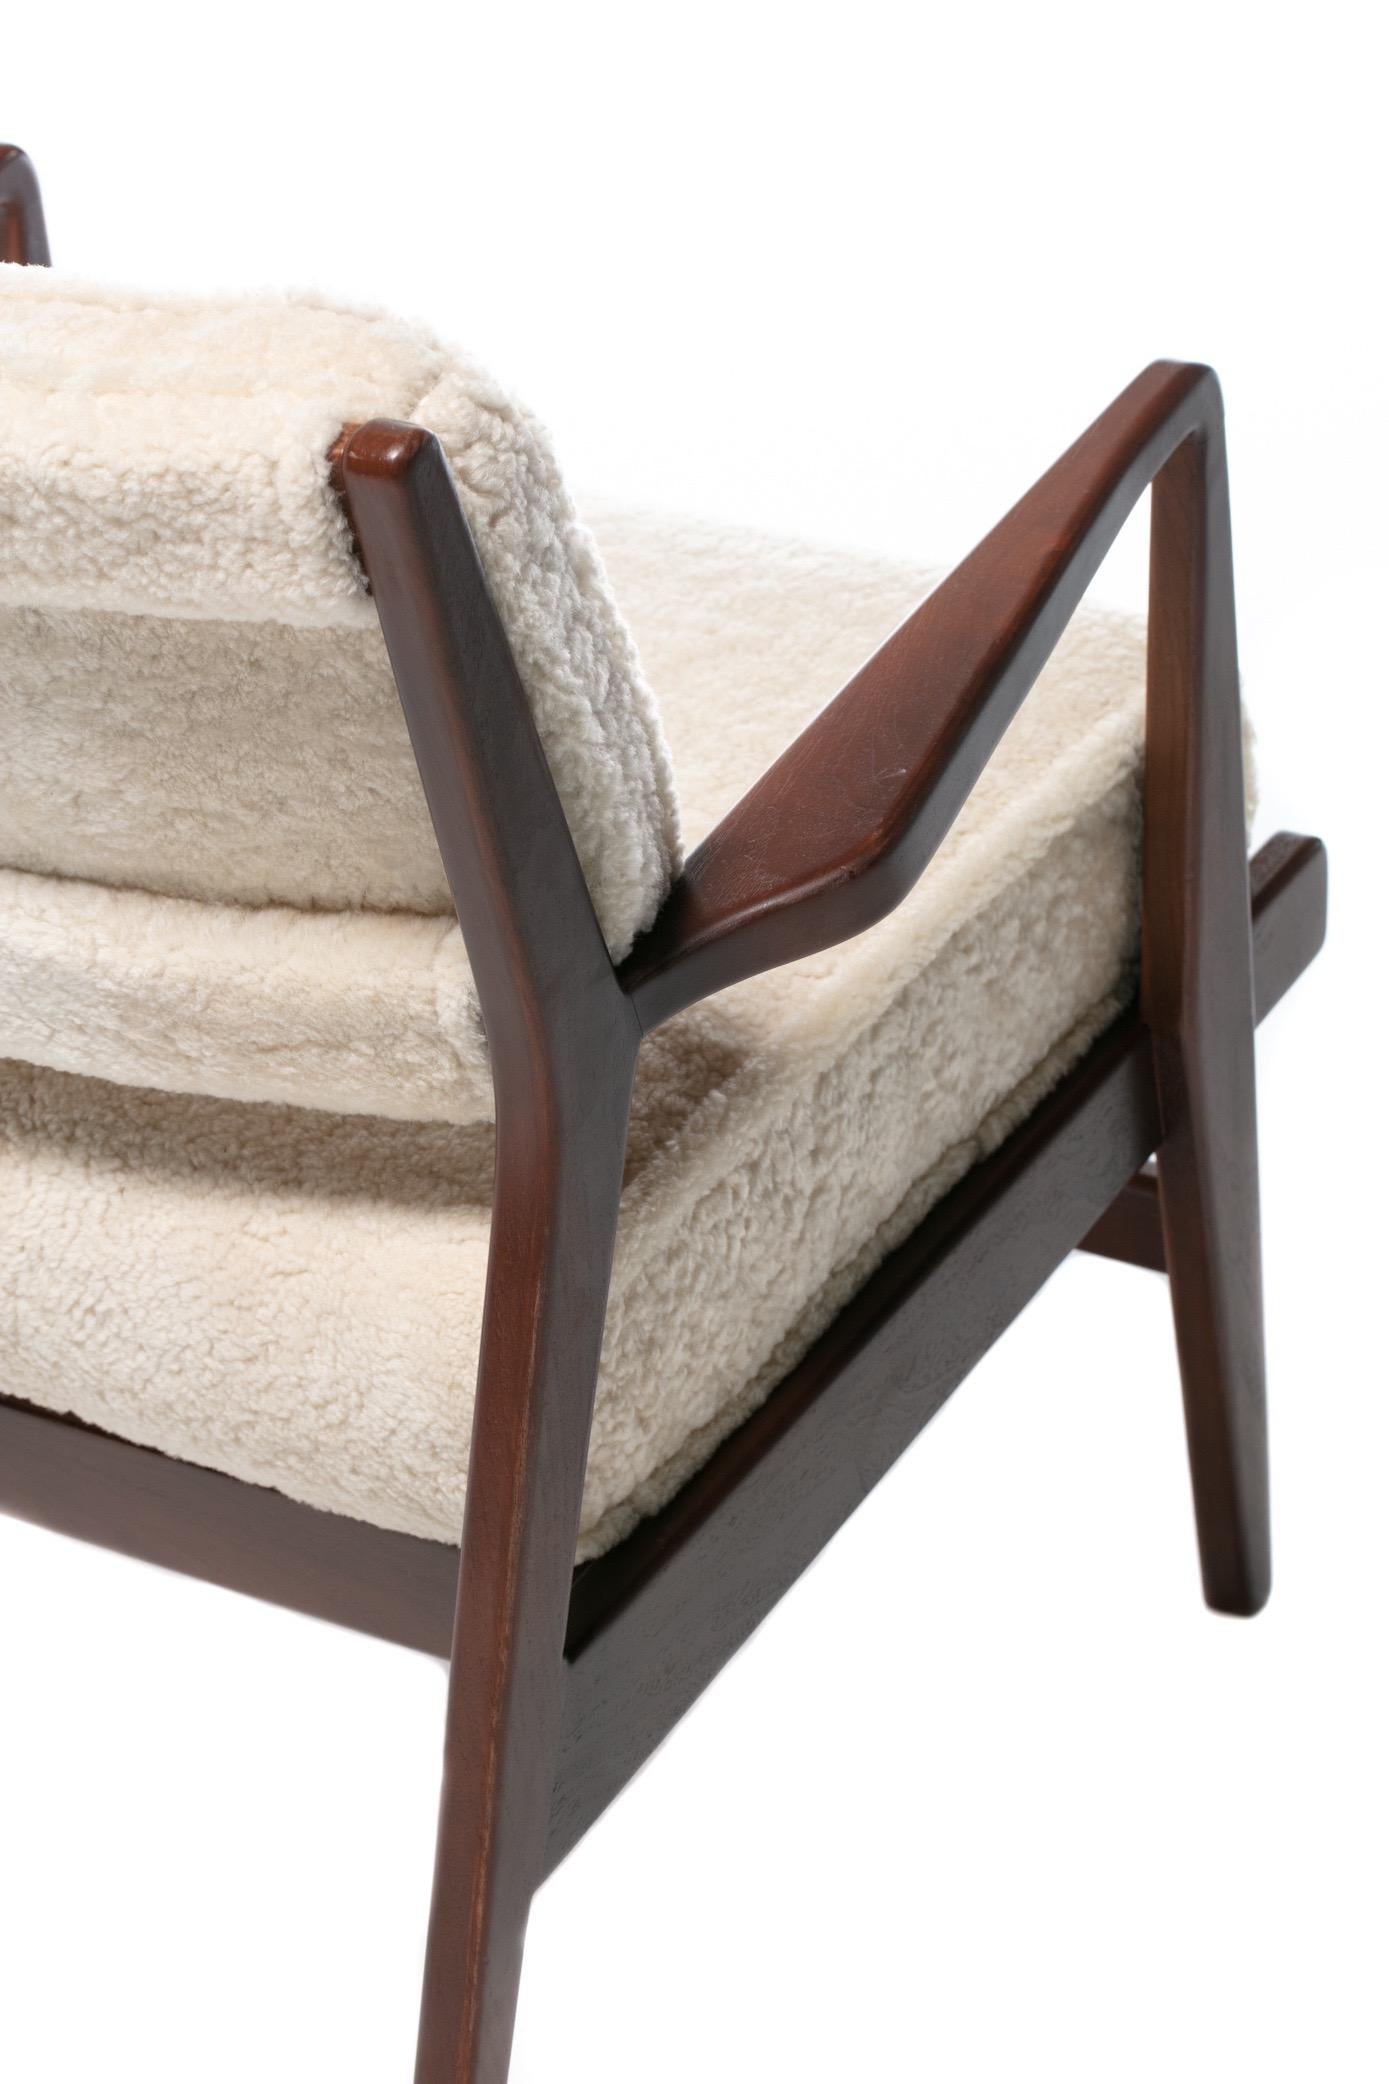 Jens Risom Walnut Lounge Chairs in Ivory Shearling, circa 1950s For Sale 2